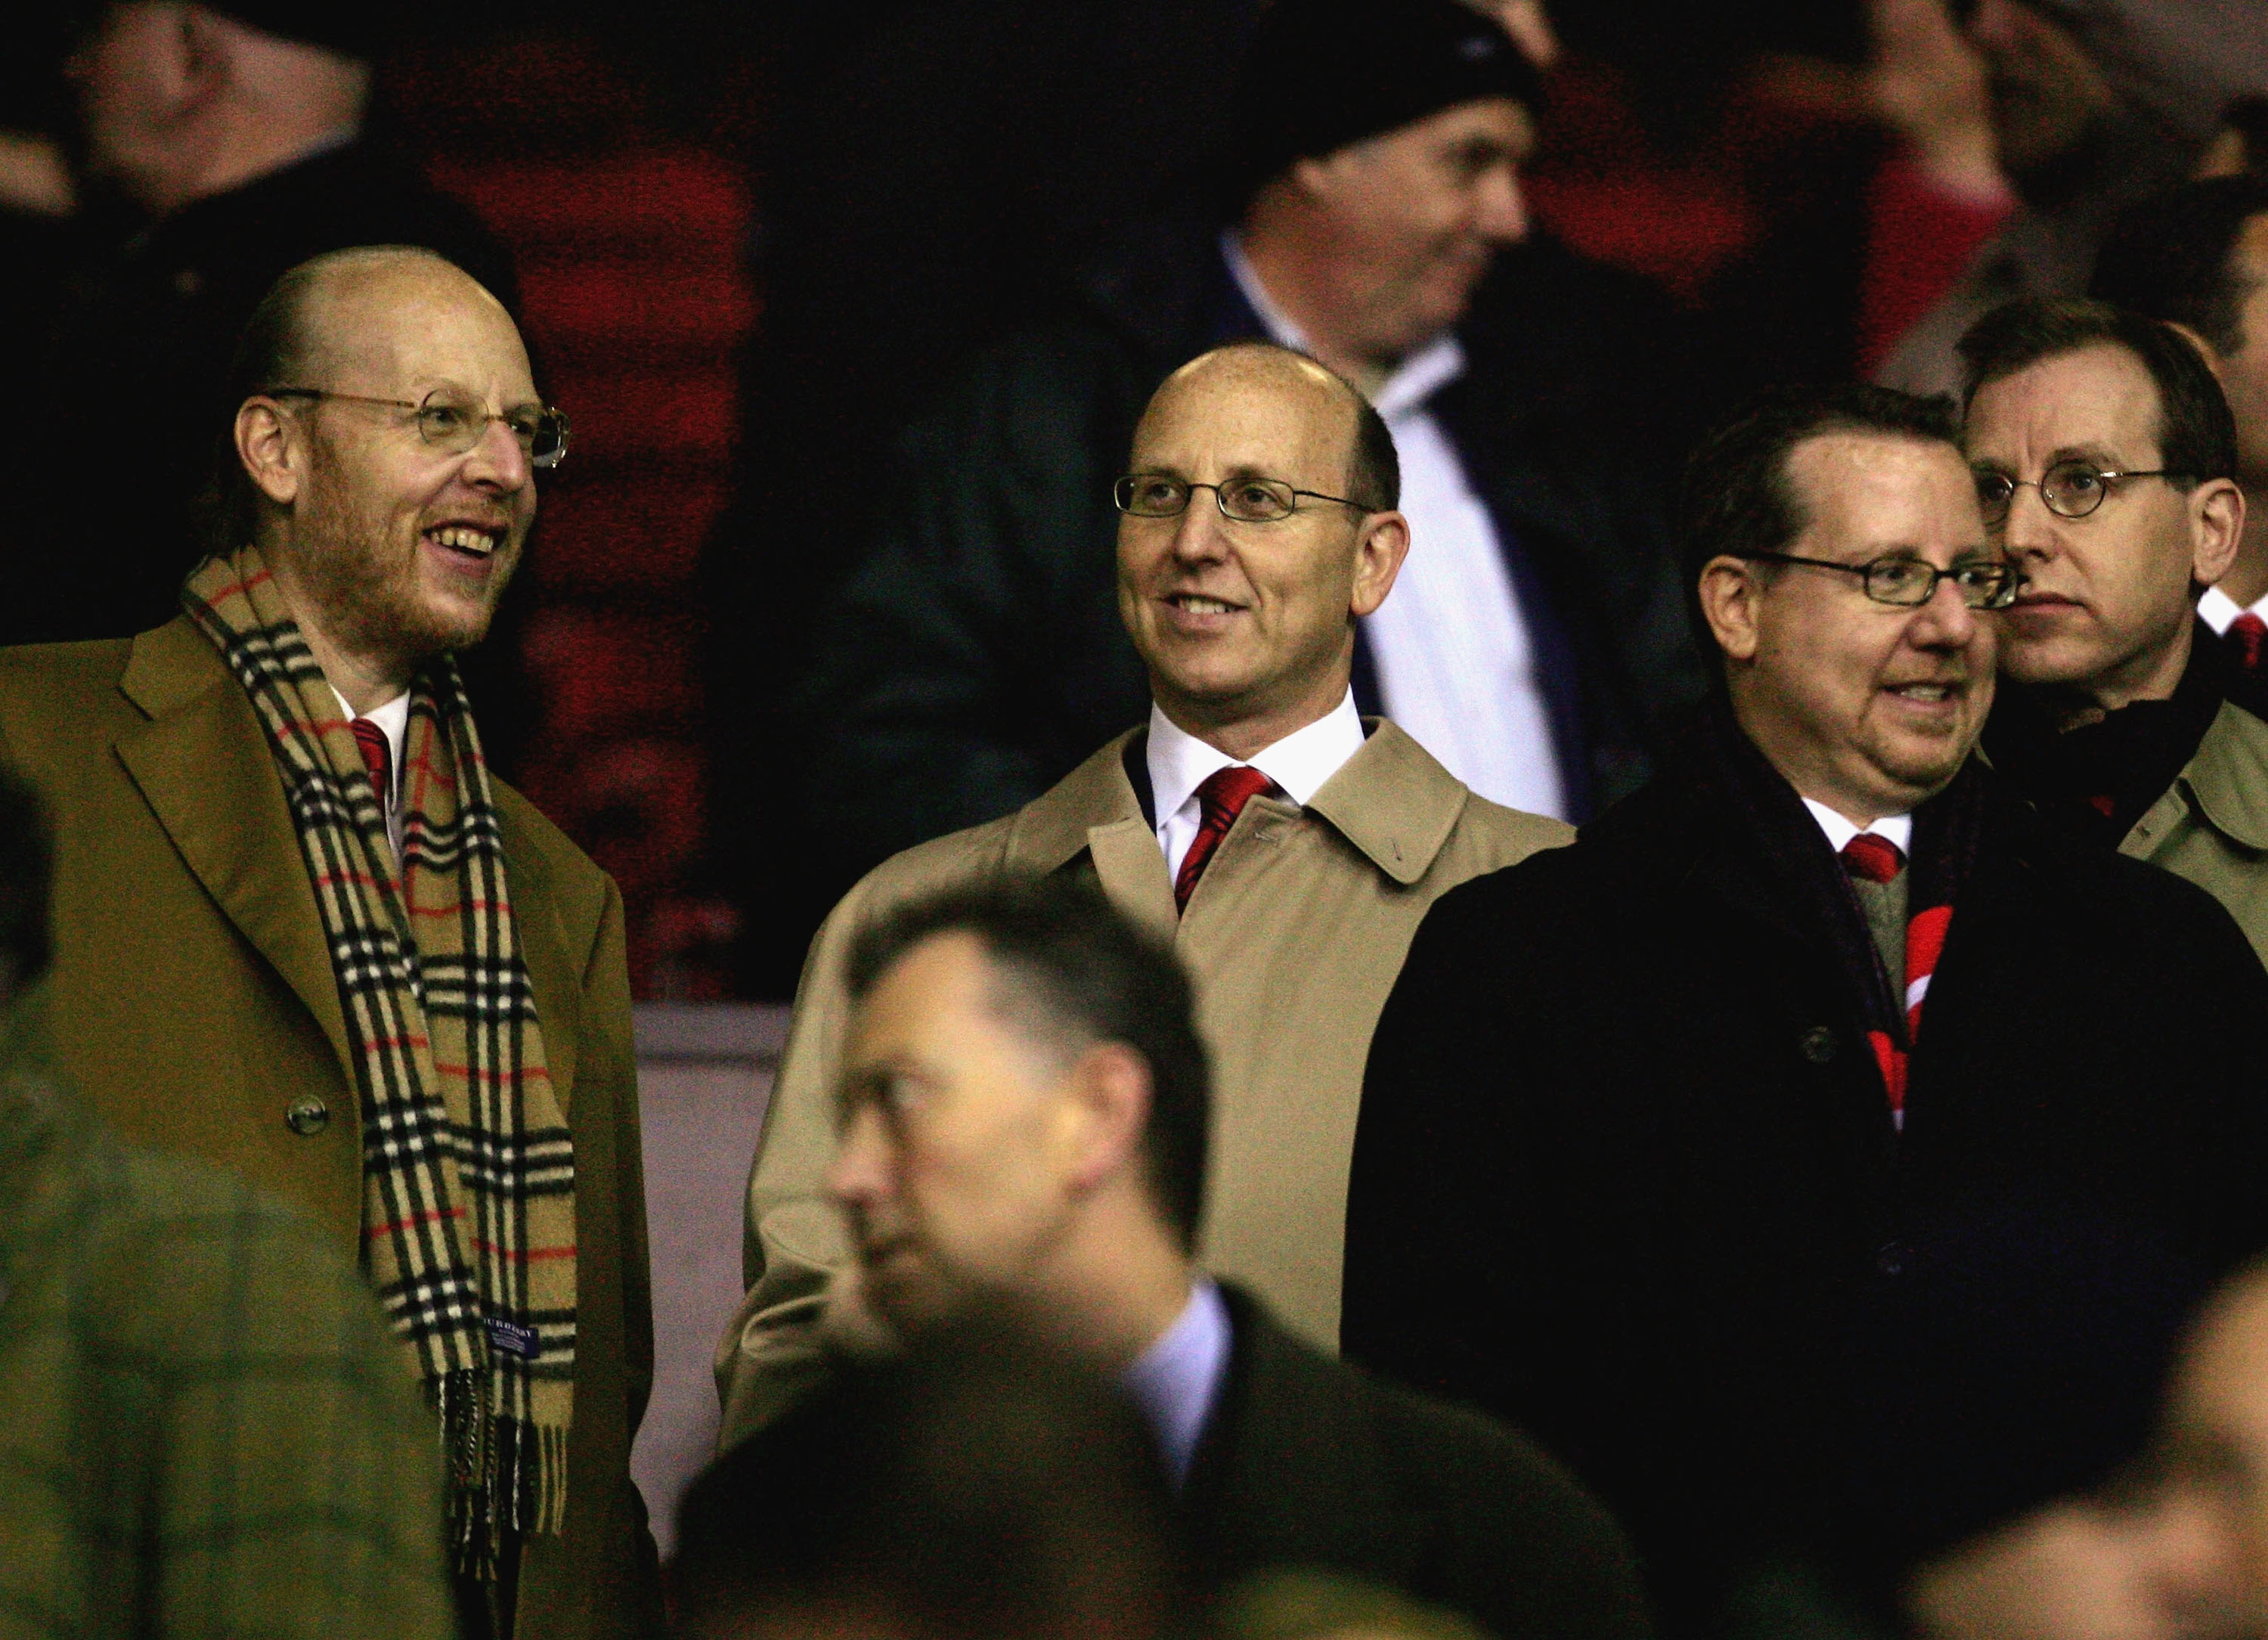 MANCHESTER, UNITED KINGDOM - NOVEMBER 22: Manchester United board members Avi Glazer, Joel Glazer and Brian Glazer watch on prior to the UEFA Champions League match between Manchester United and Villarreal at Old Trafford on November 22, 2005 in Mancheste